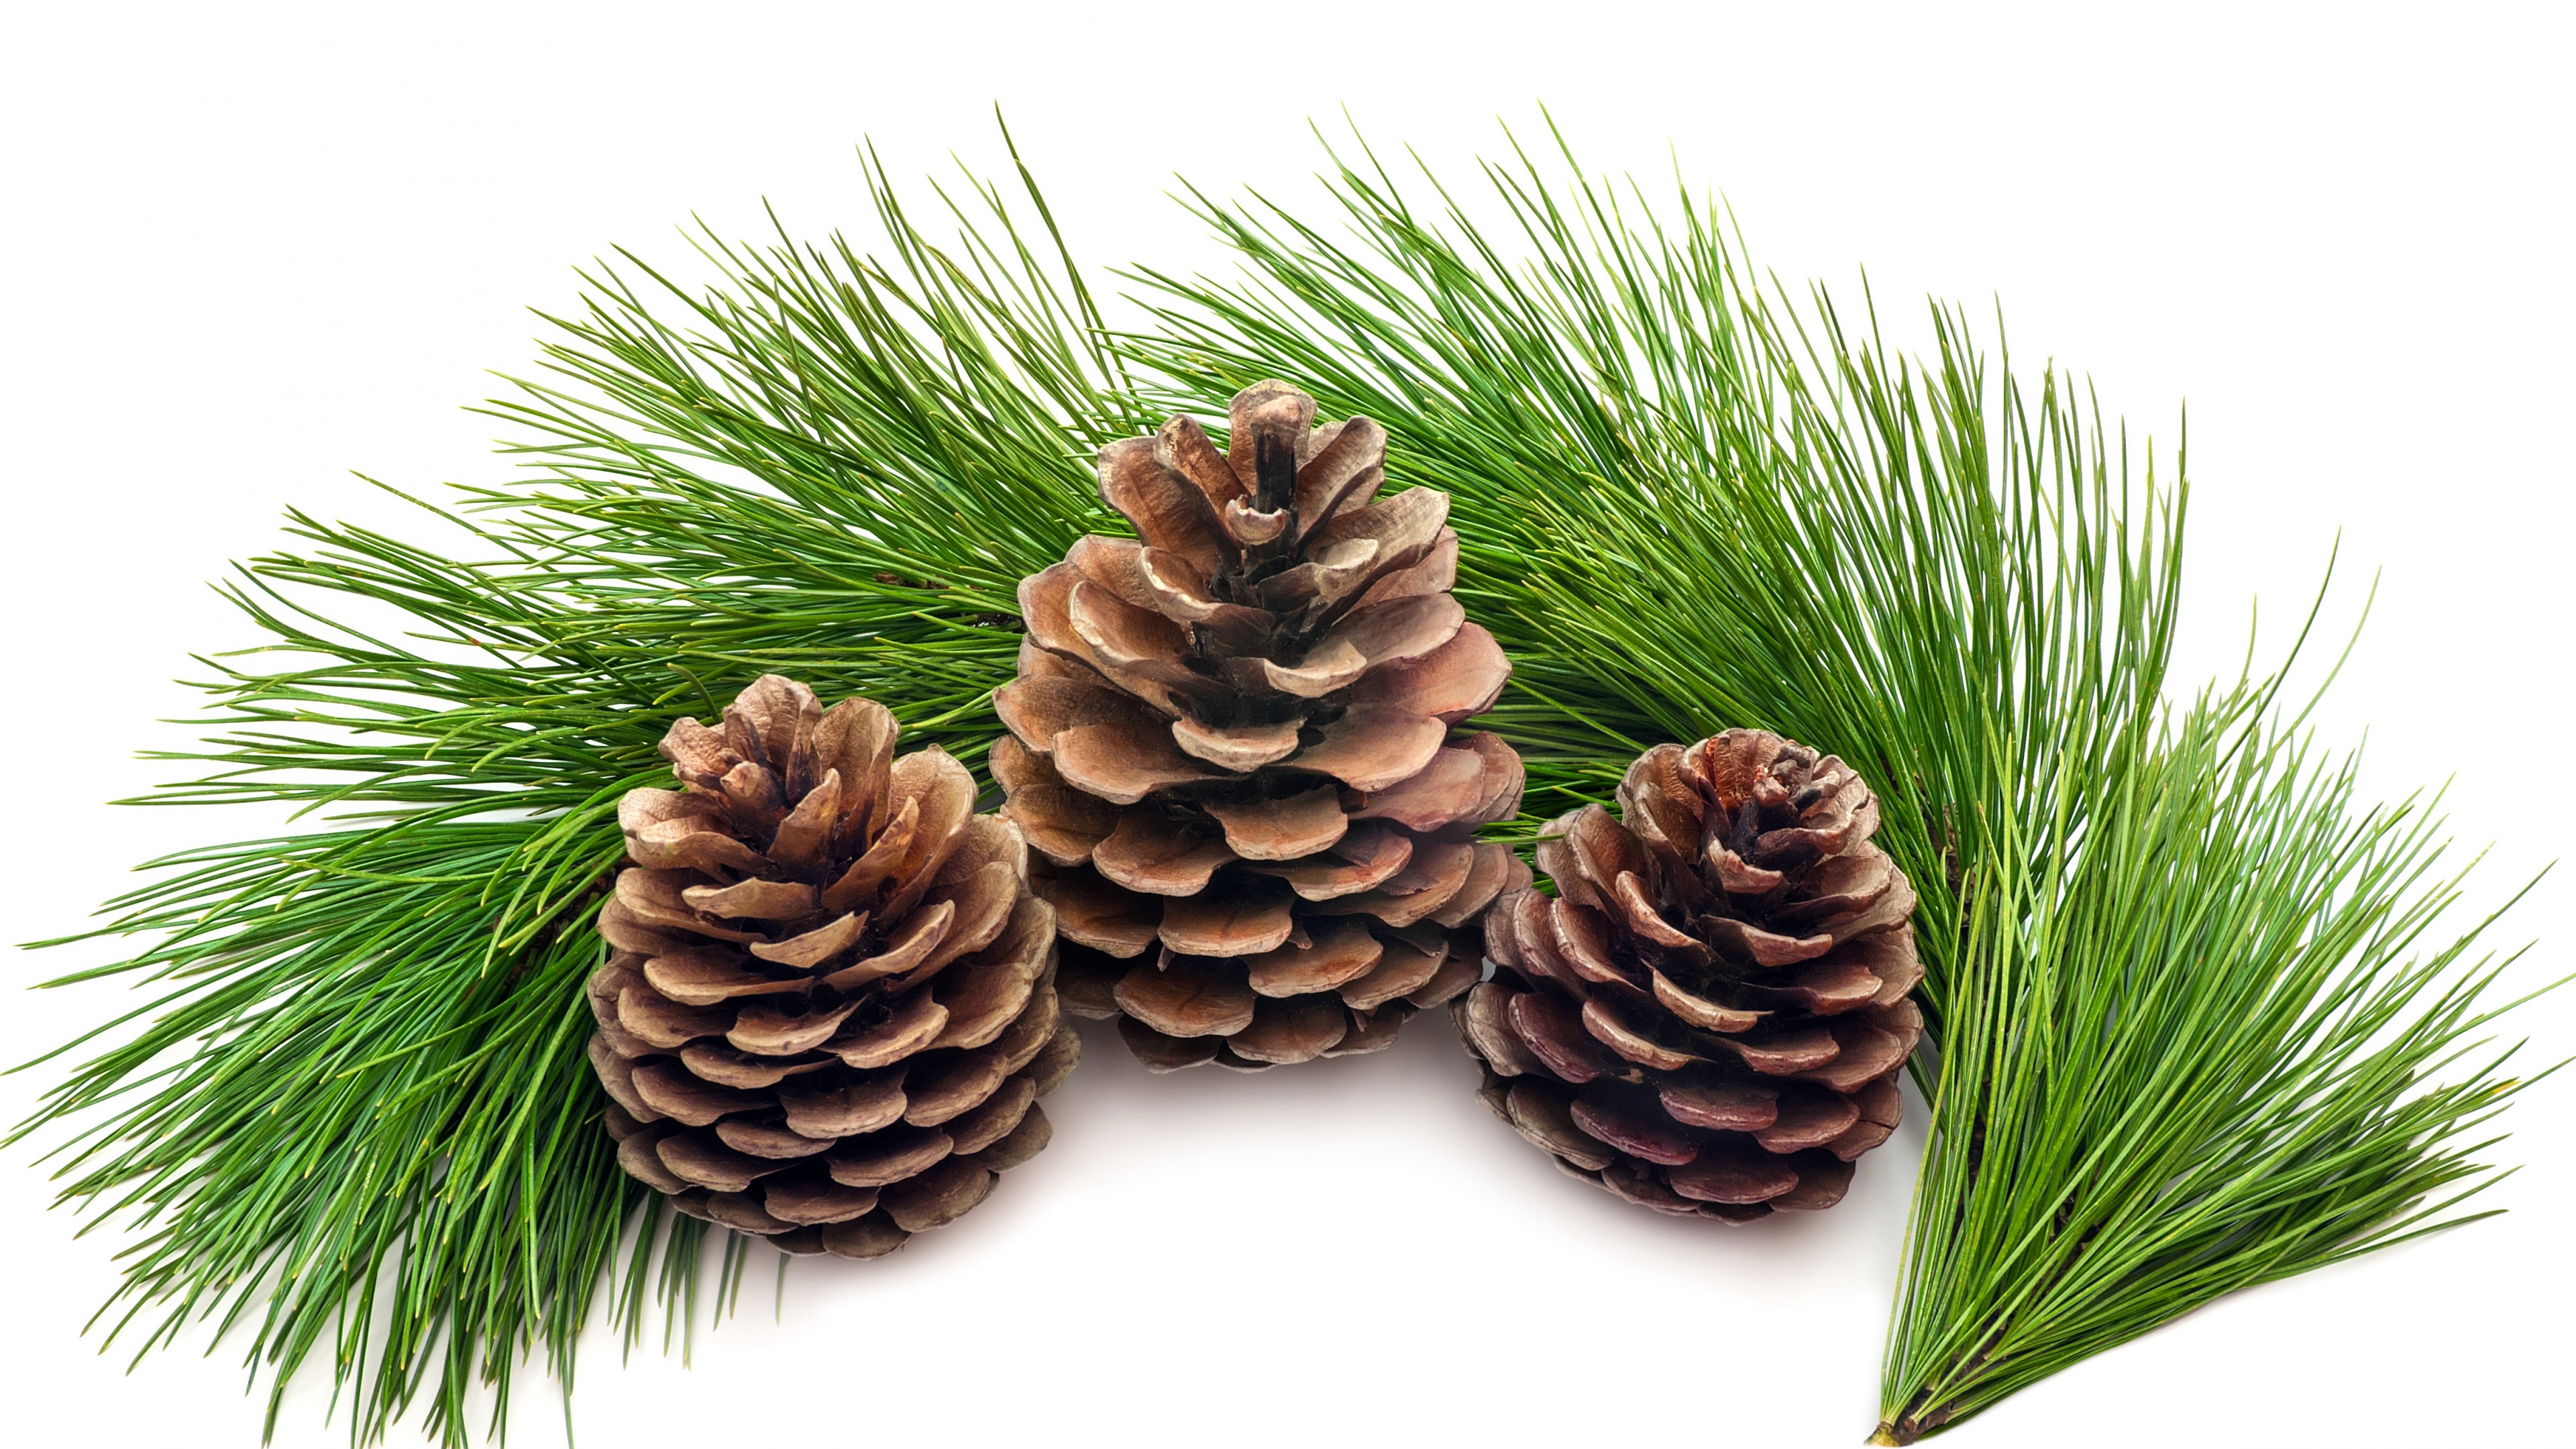 Brown Pine Cone on White Background. Wallpaper in 3840x2160 Resolution